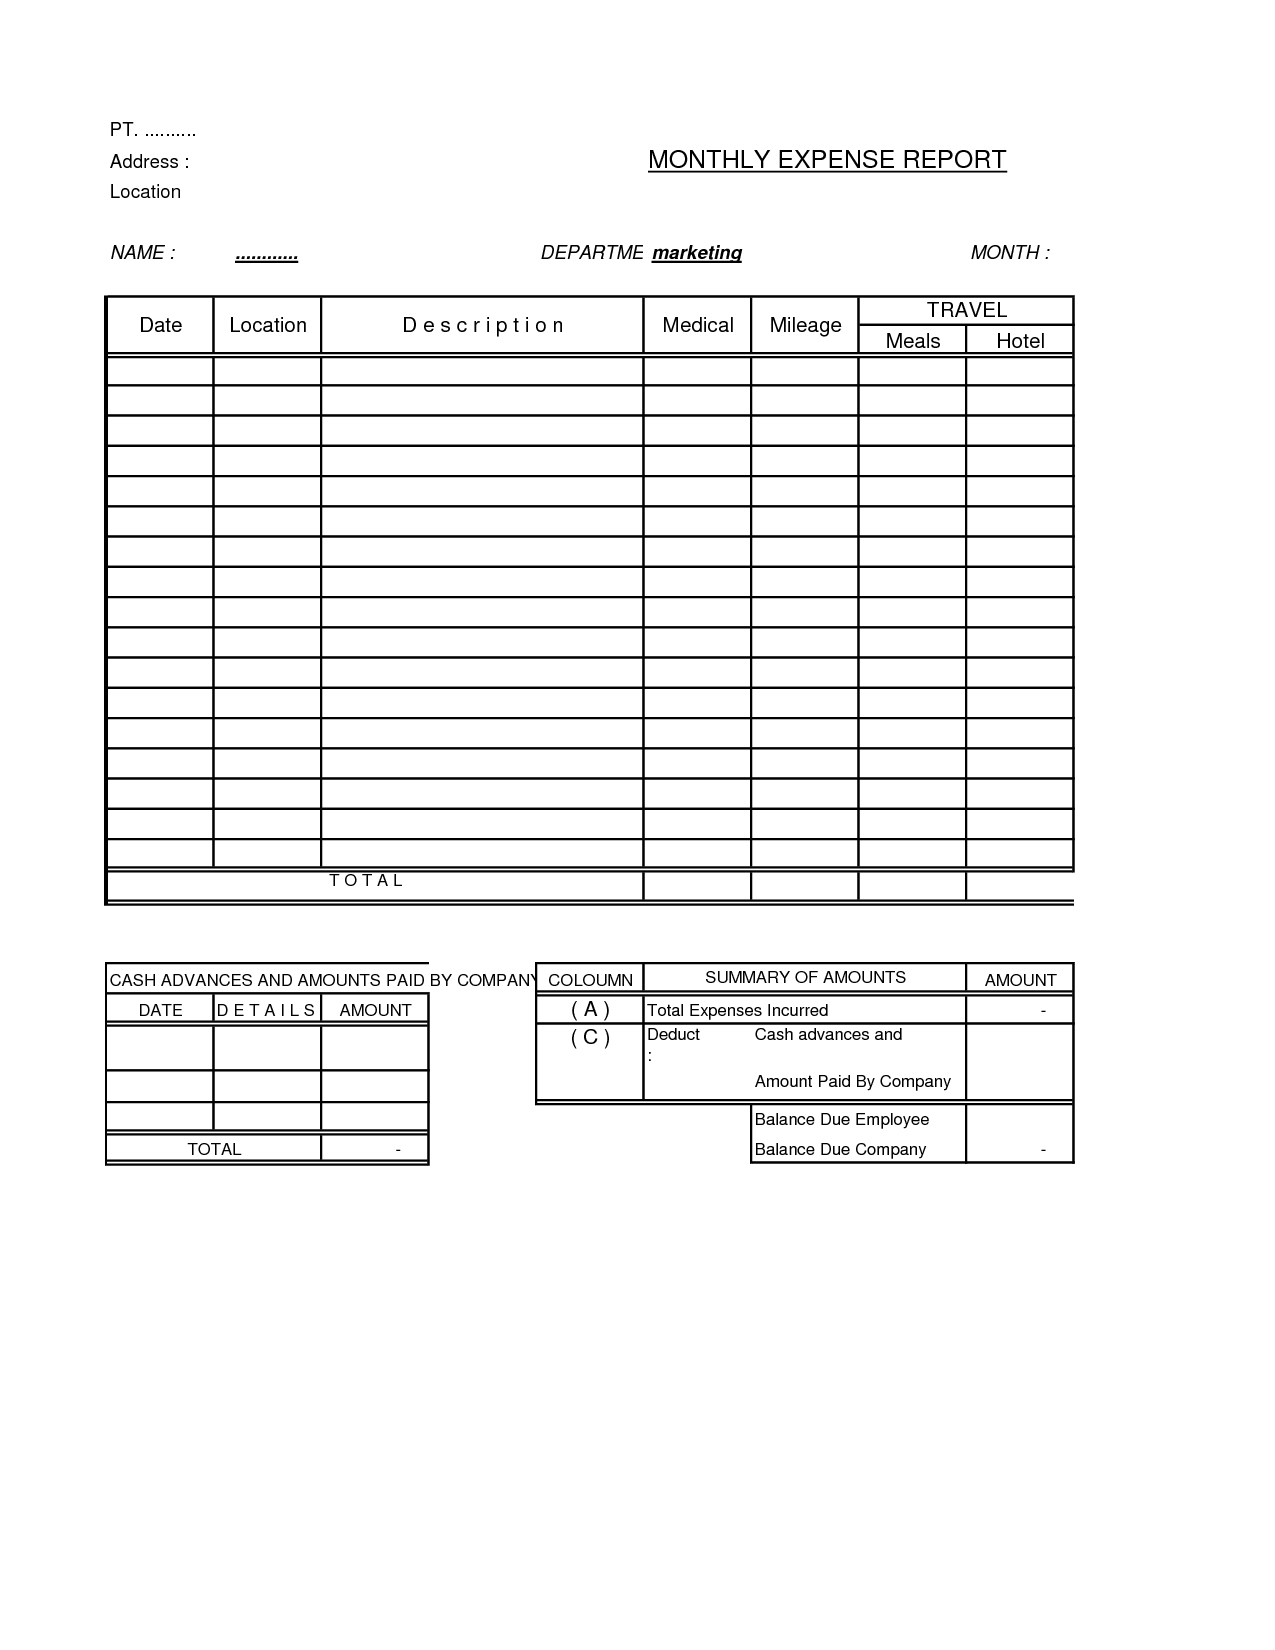 Expense Report Form And Samples For Your Inspirations Intended For Daily Expense Report Template